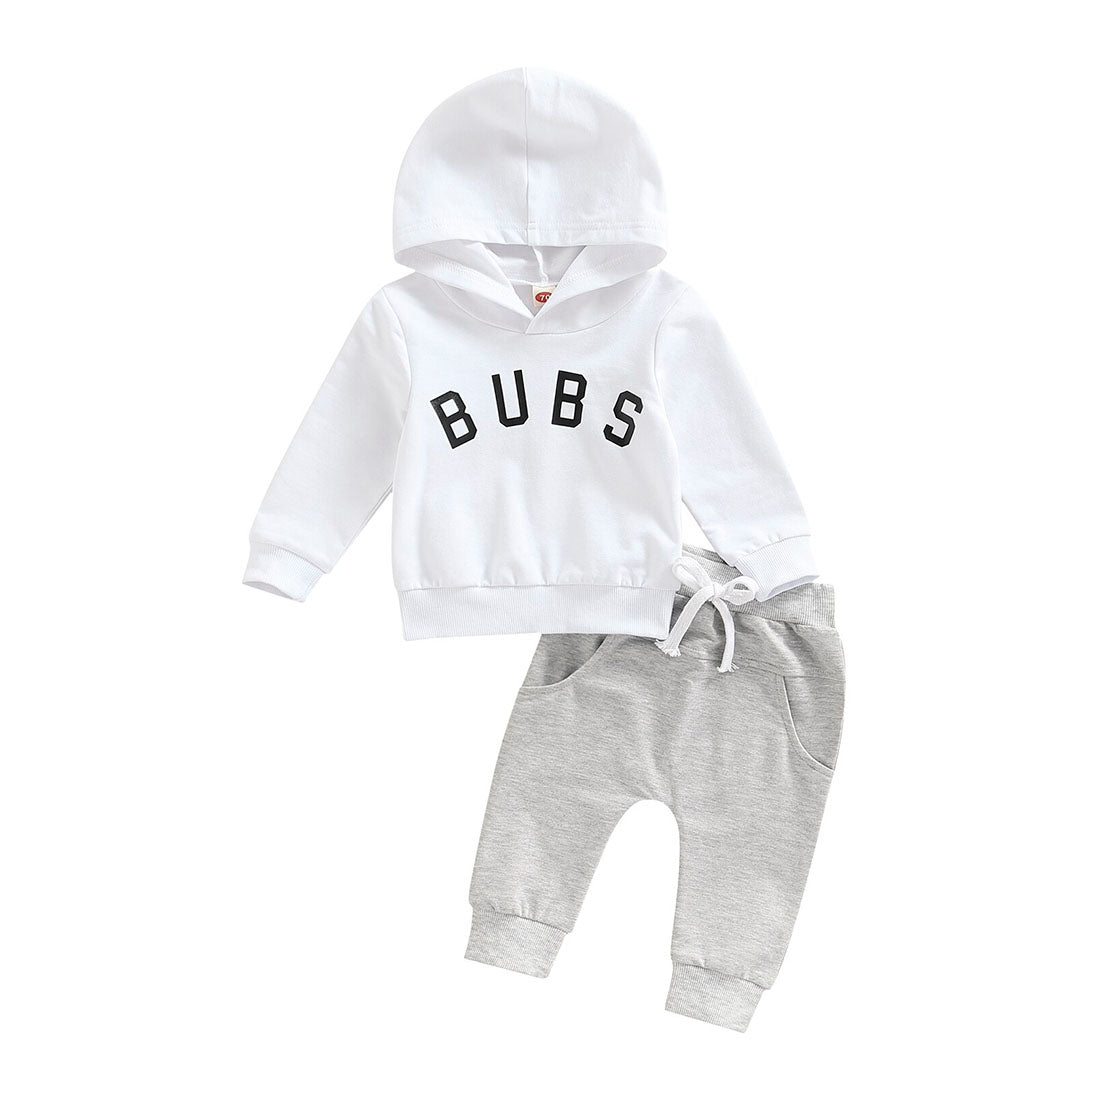 8 Adorable Outfit Ideas to Dress Your Baby Boy – Itty Bitty Toes